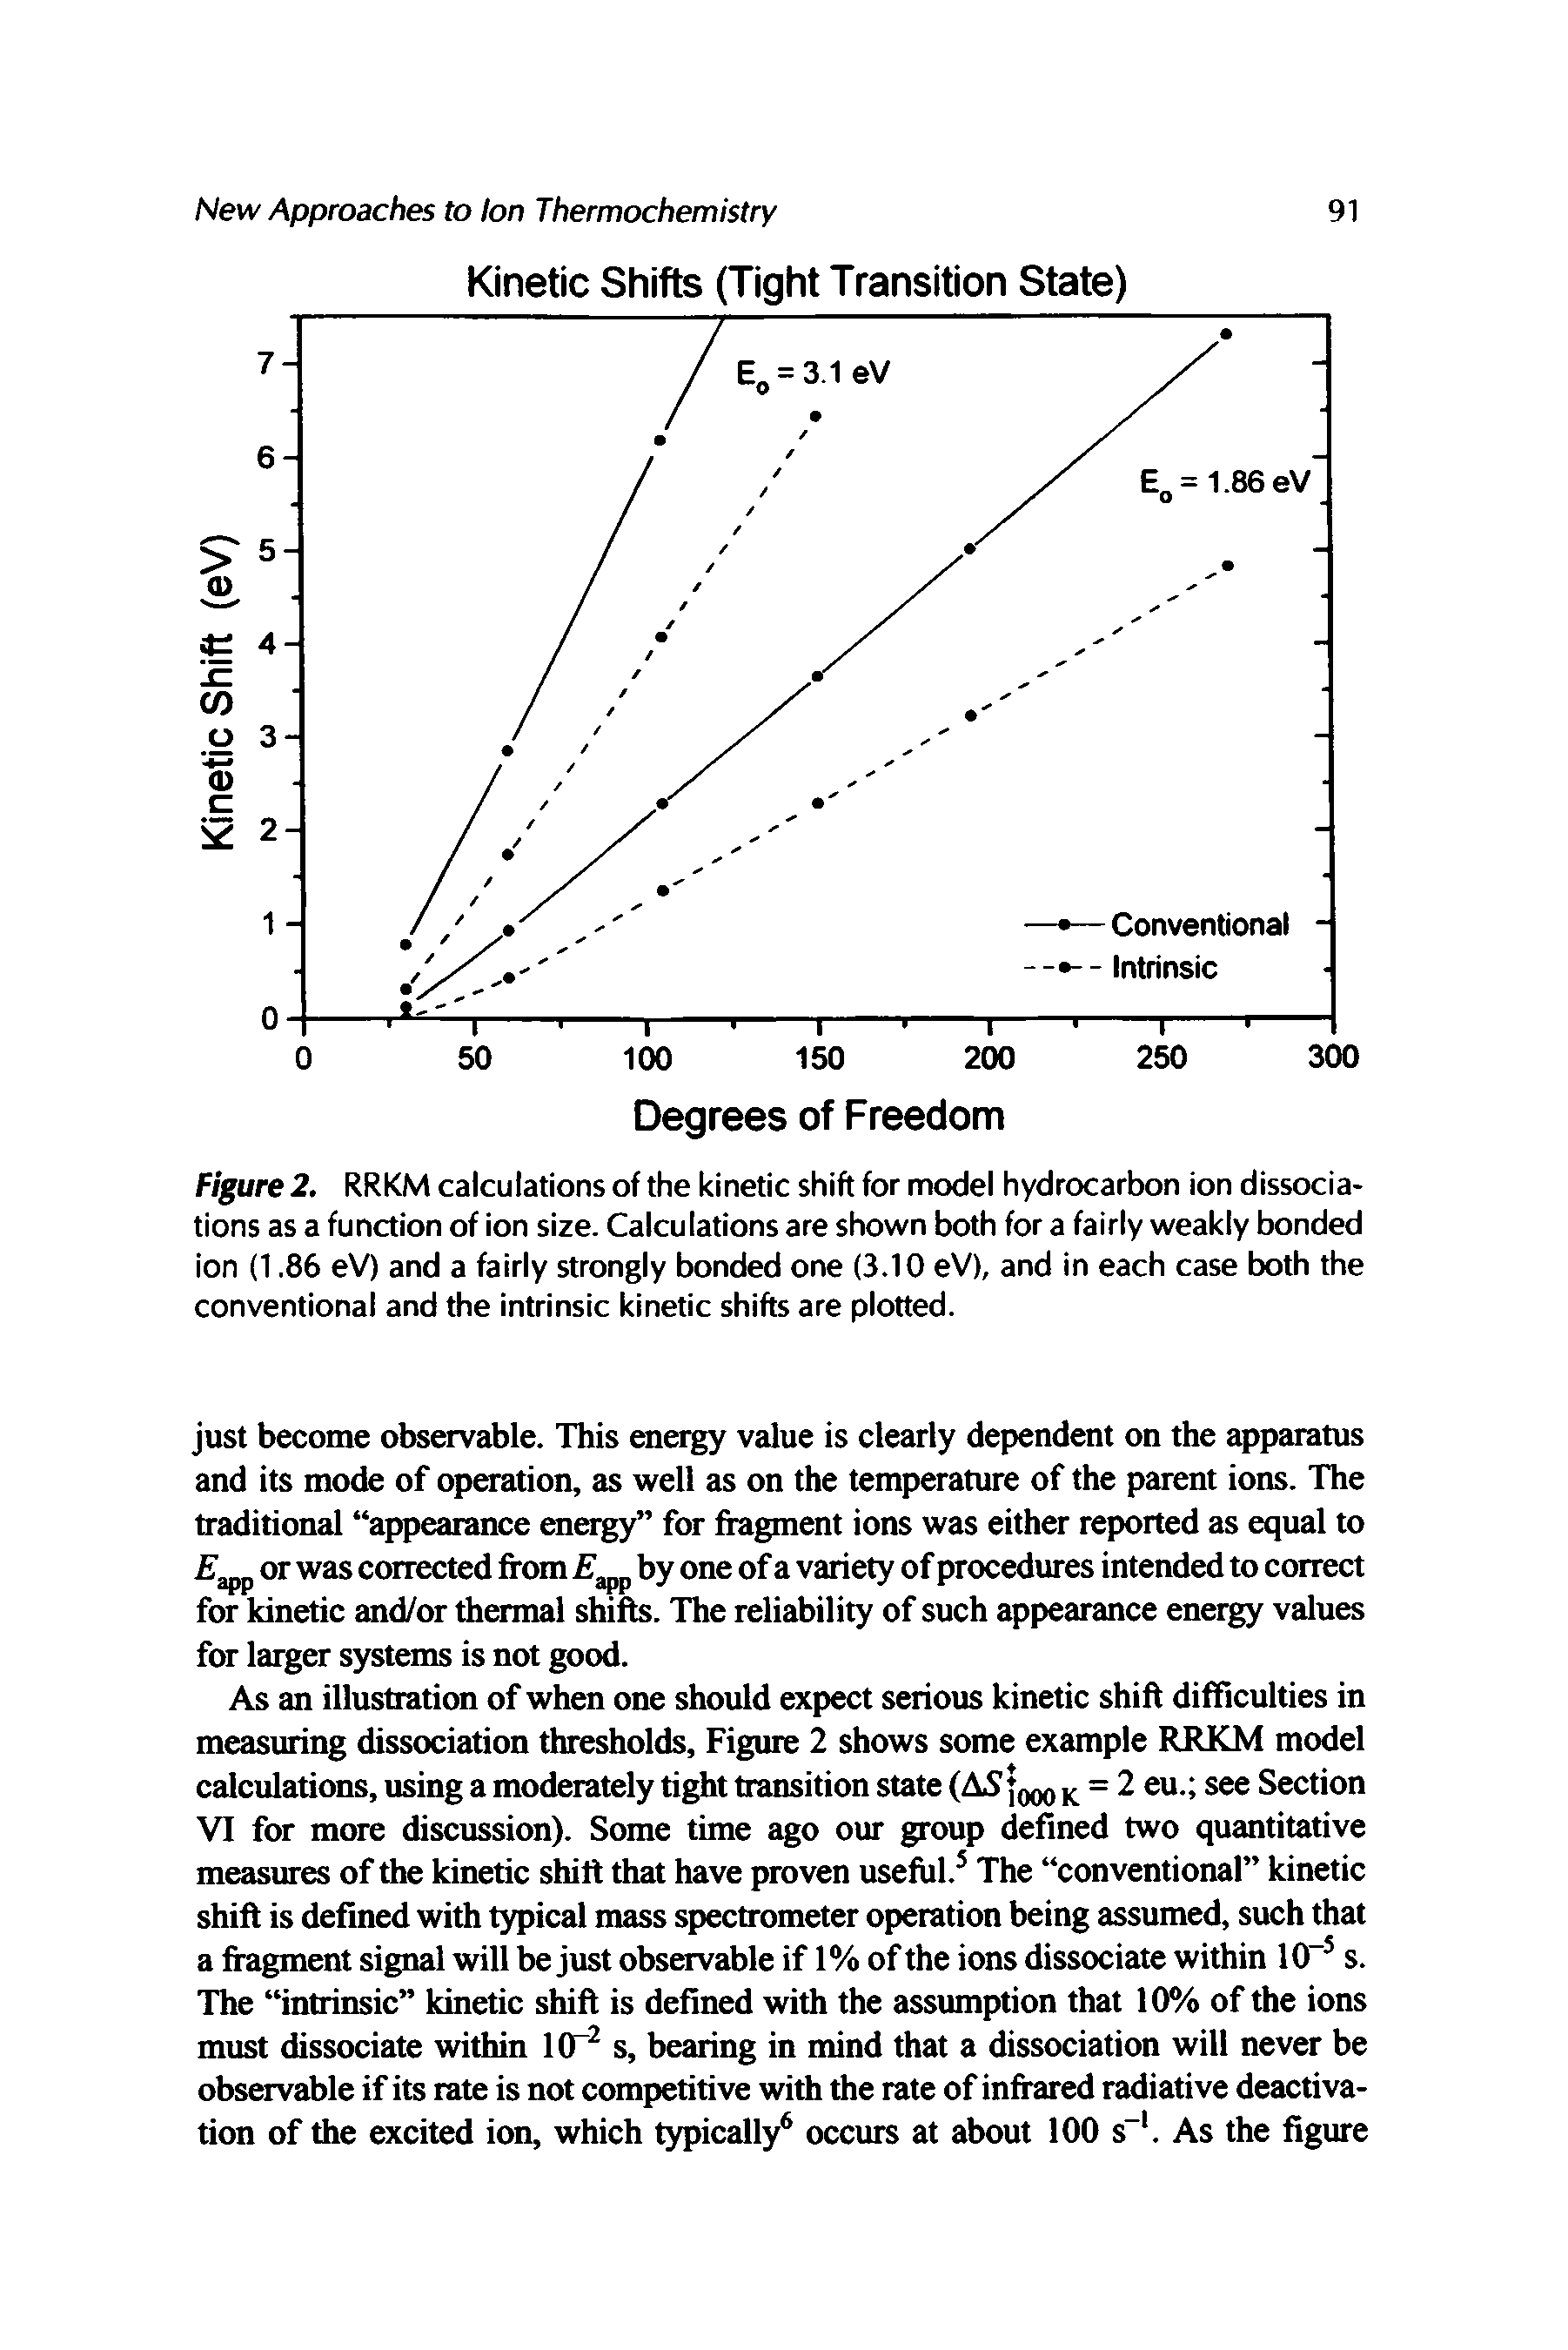 Figure 2. RRKM calculations of the kinetic shift for model hydrocarbon ion dissociations as a function of ion size. Calculations are shown both for a fairly weakly bonded ion (1.86 eV) and a fairly strongly bonded one (3.10 eV), and in each case both the conventional and the intrinsic kinetic shifts are plotted.